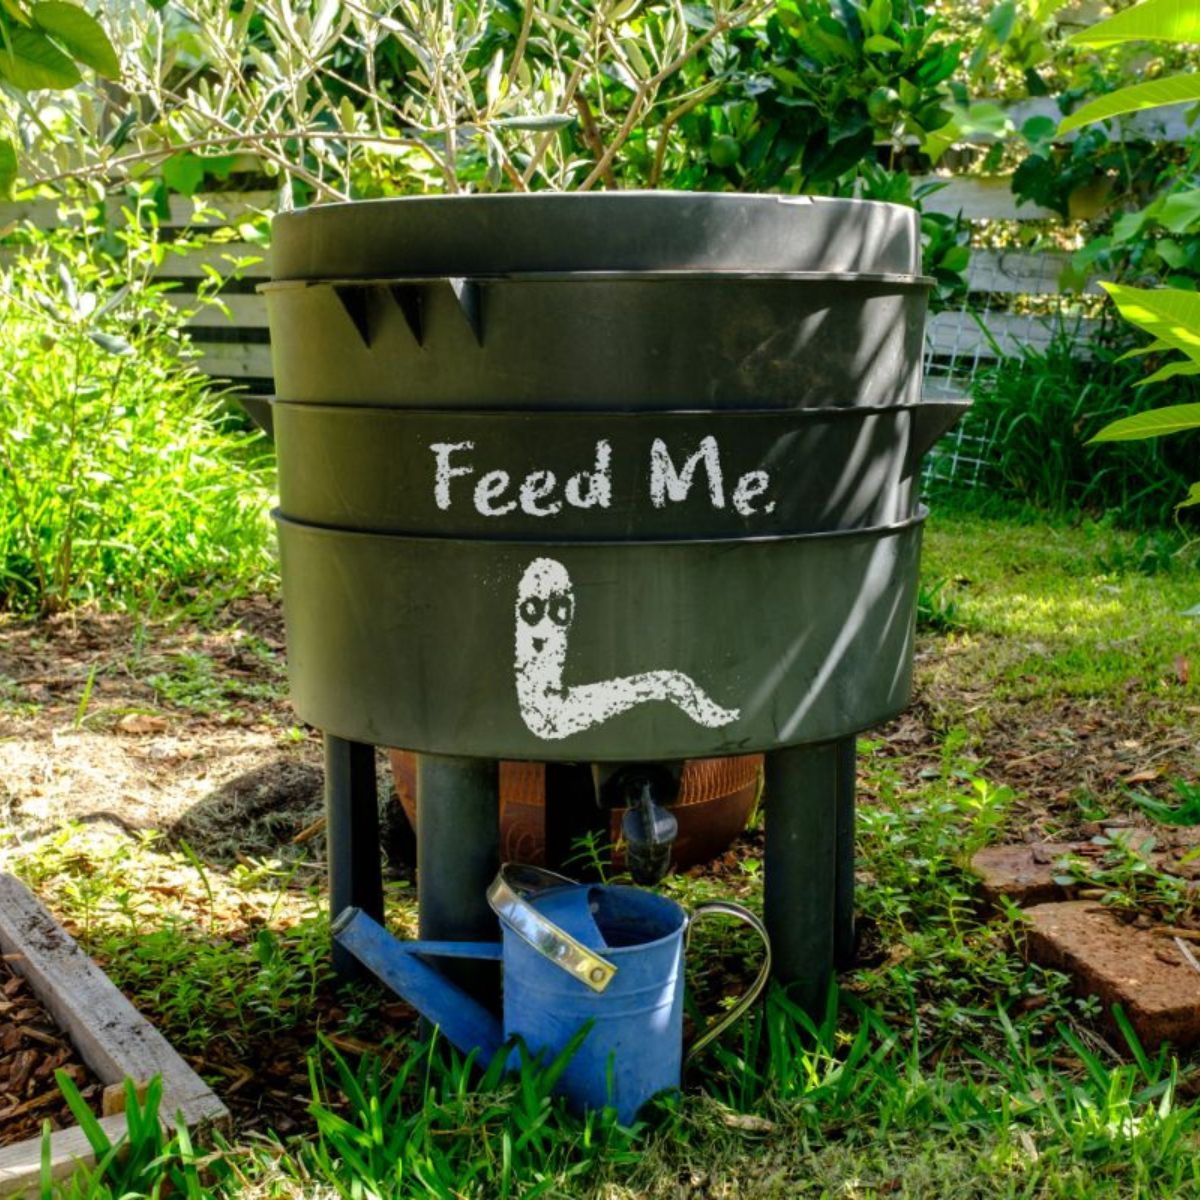 A wormery compost bin in a organic Australian garden with Feed Me worm sign.